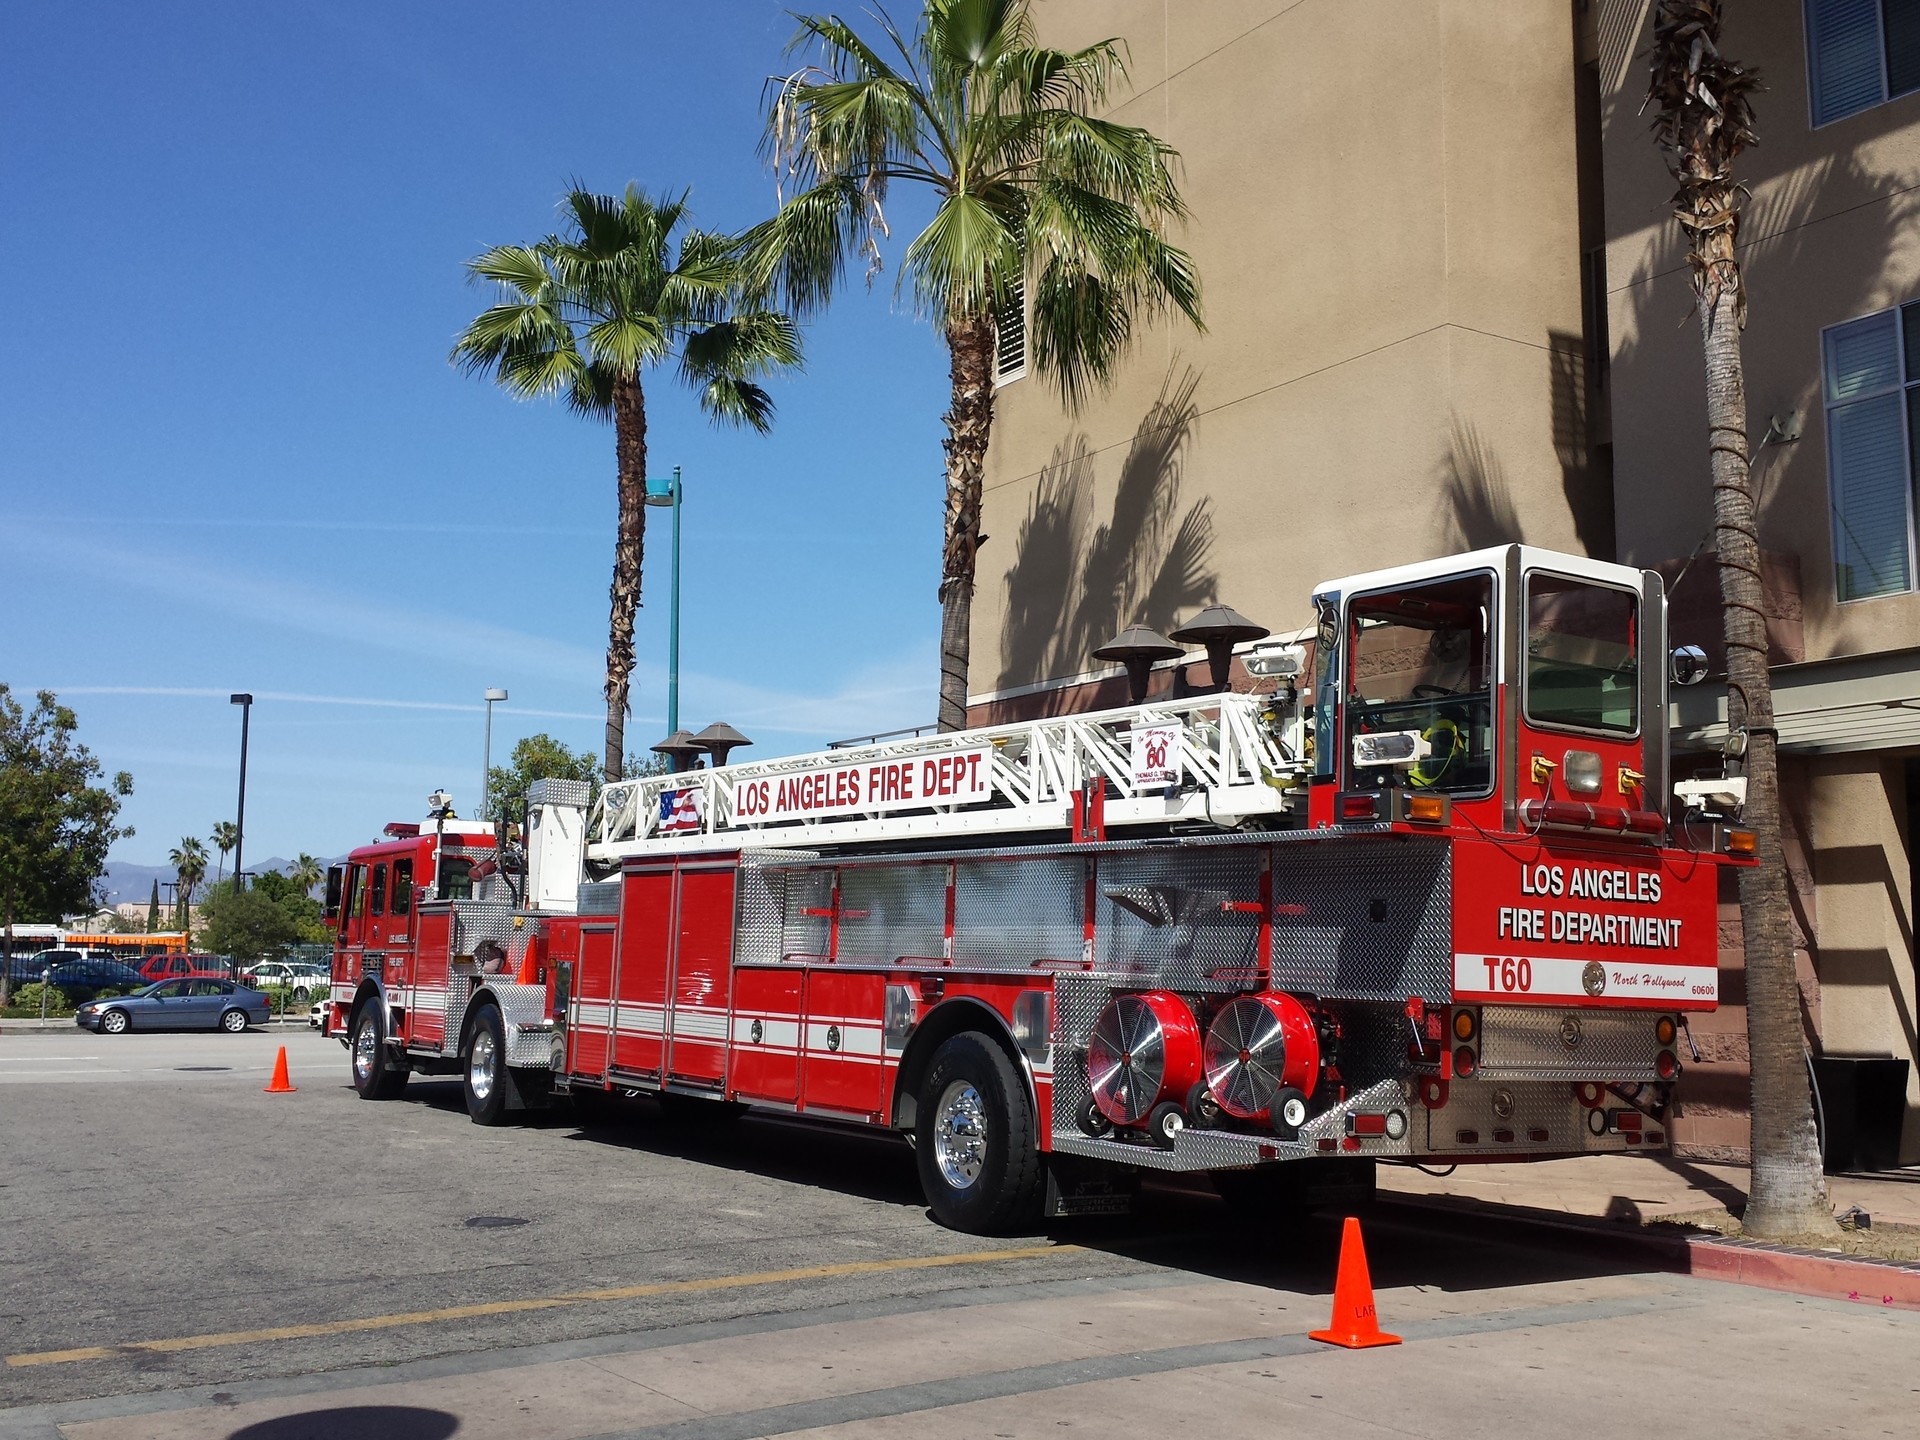 1920x1440 Los Angeles Fire Department. the shiniest LAFD truck in Norh Hollywood  while the operators are